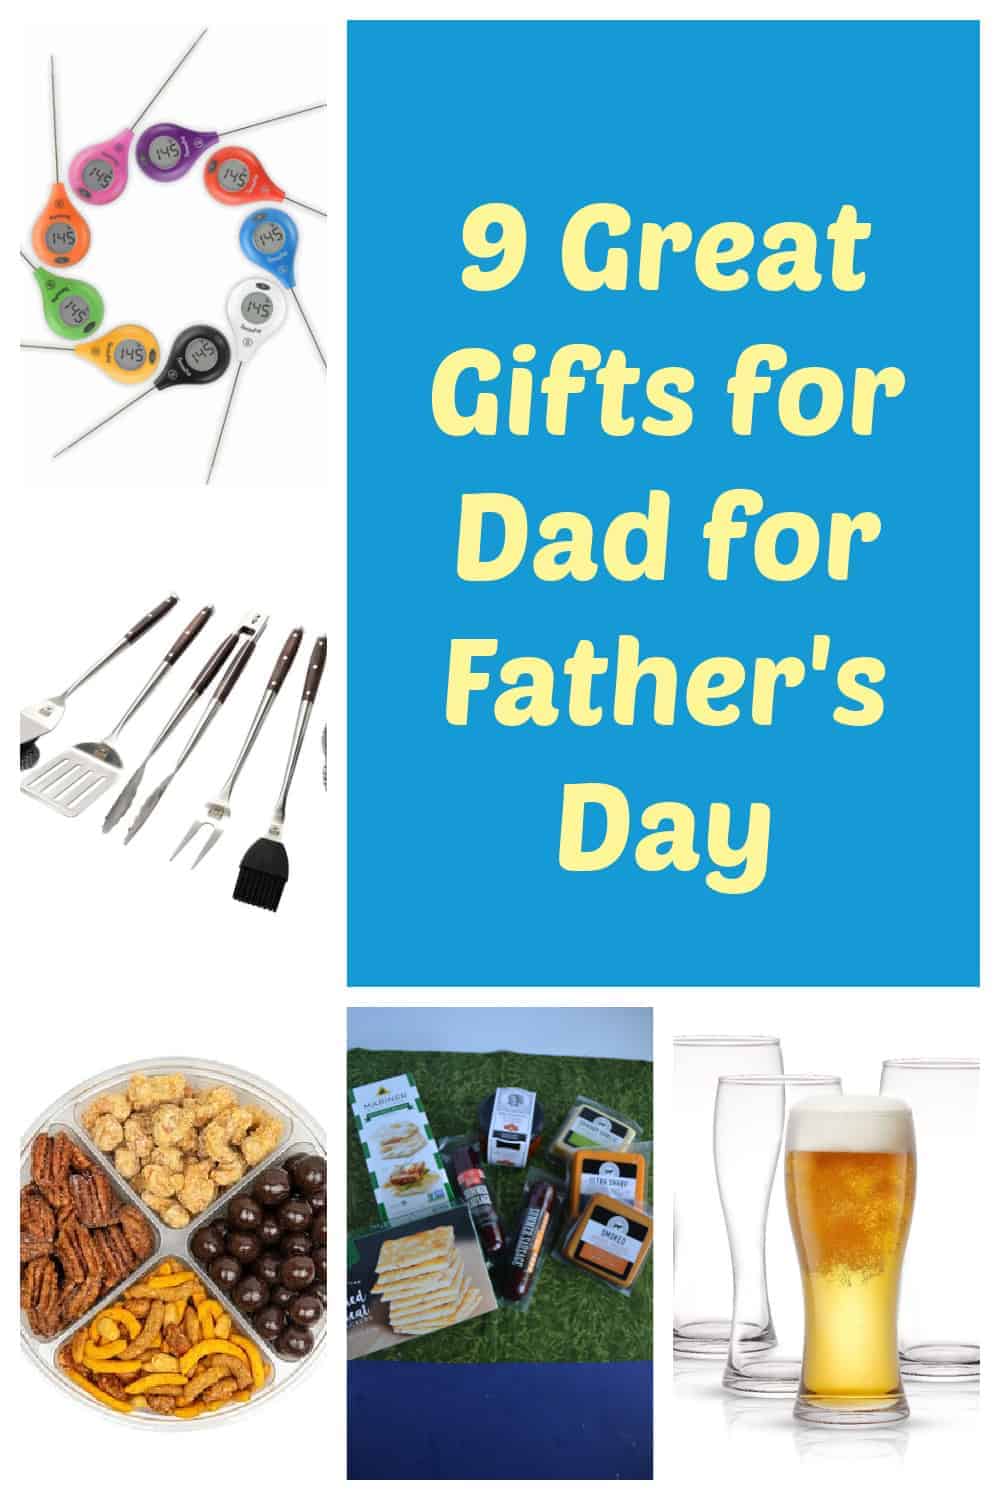 9 Great Gifts for Father’s Day